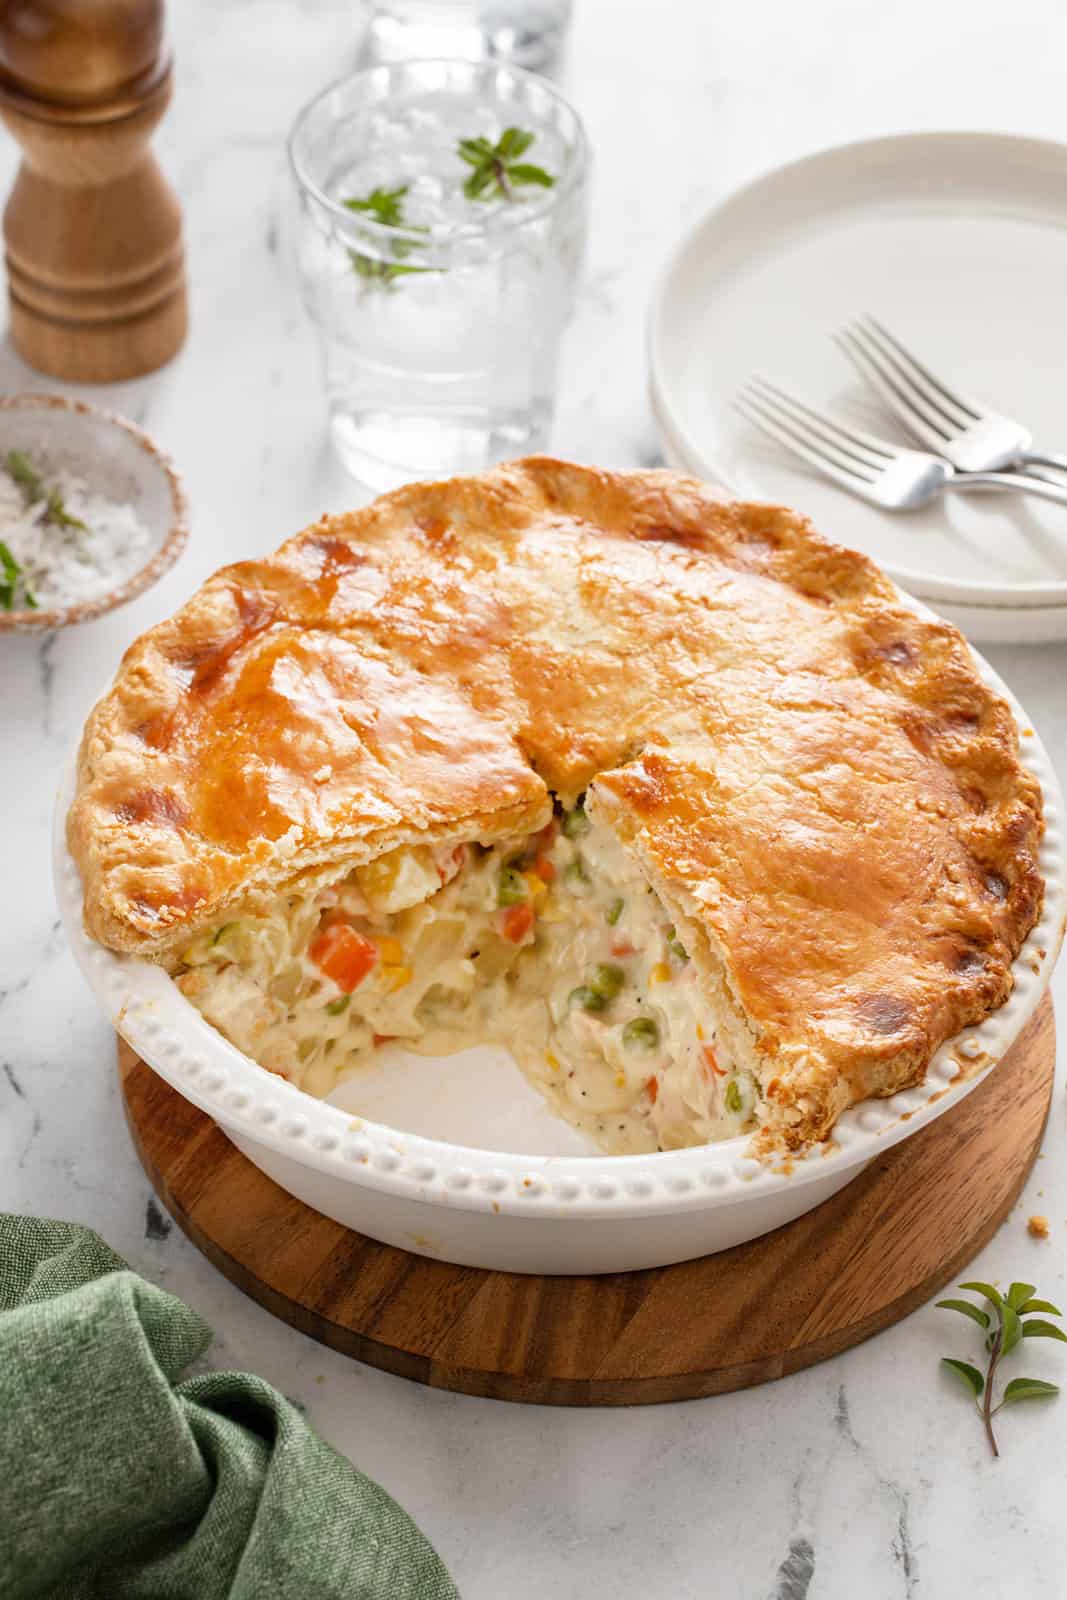 Homemade chicken pot pie with two slices taken from the pie plate.